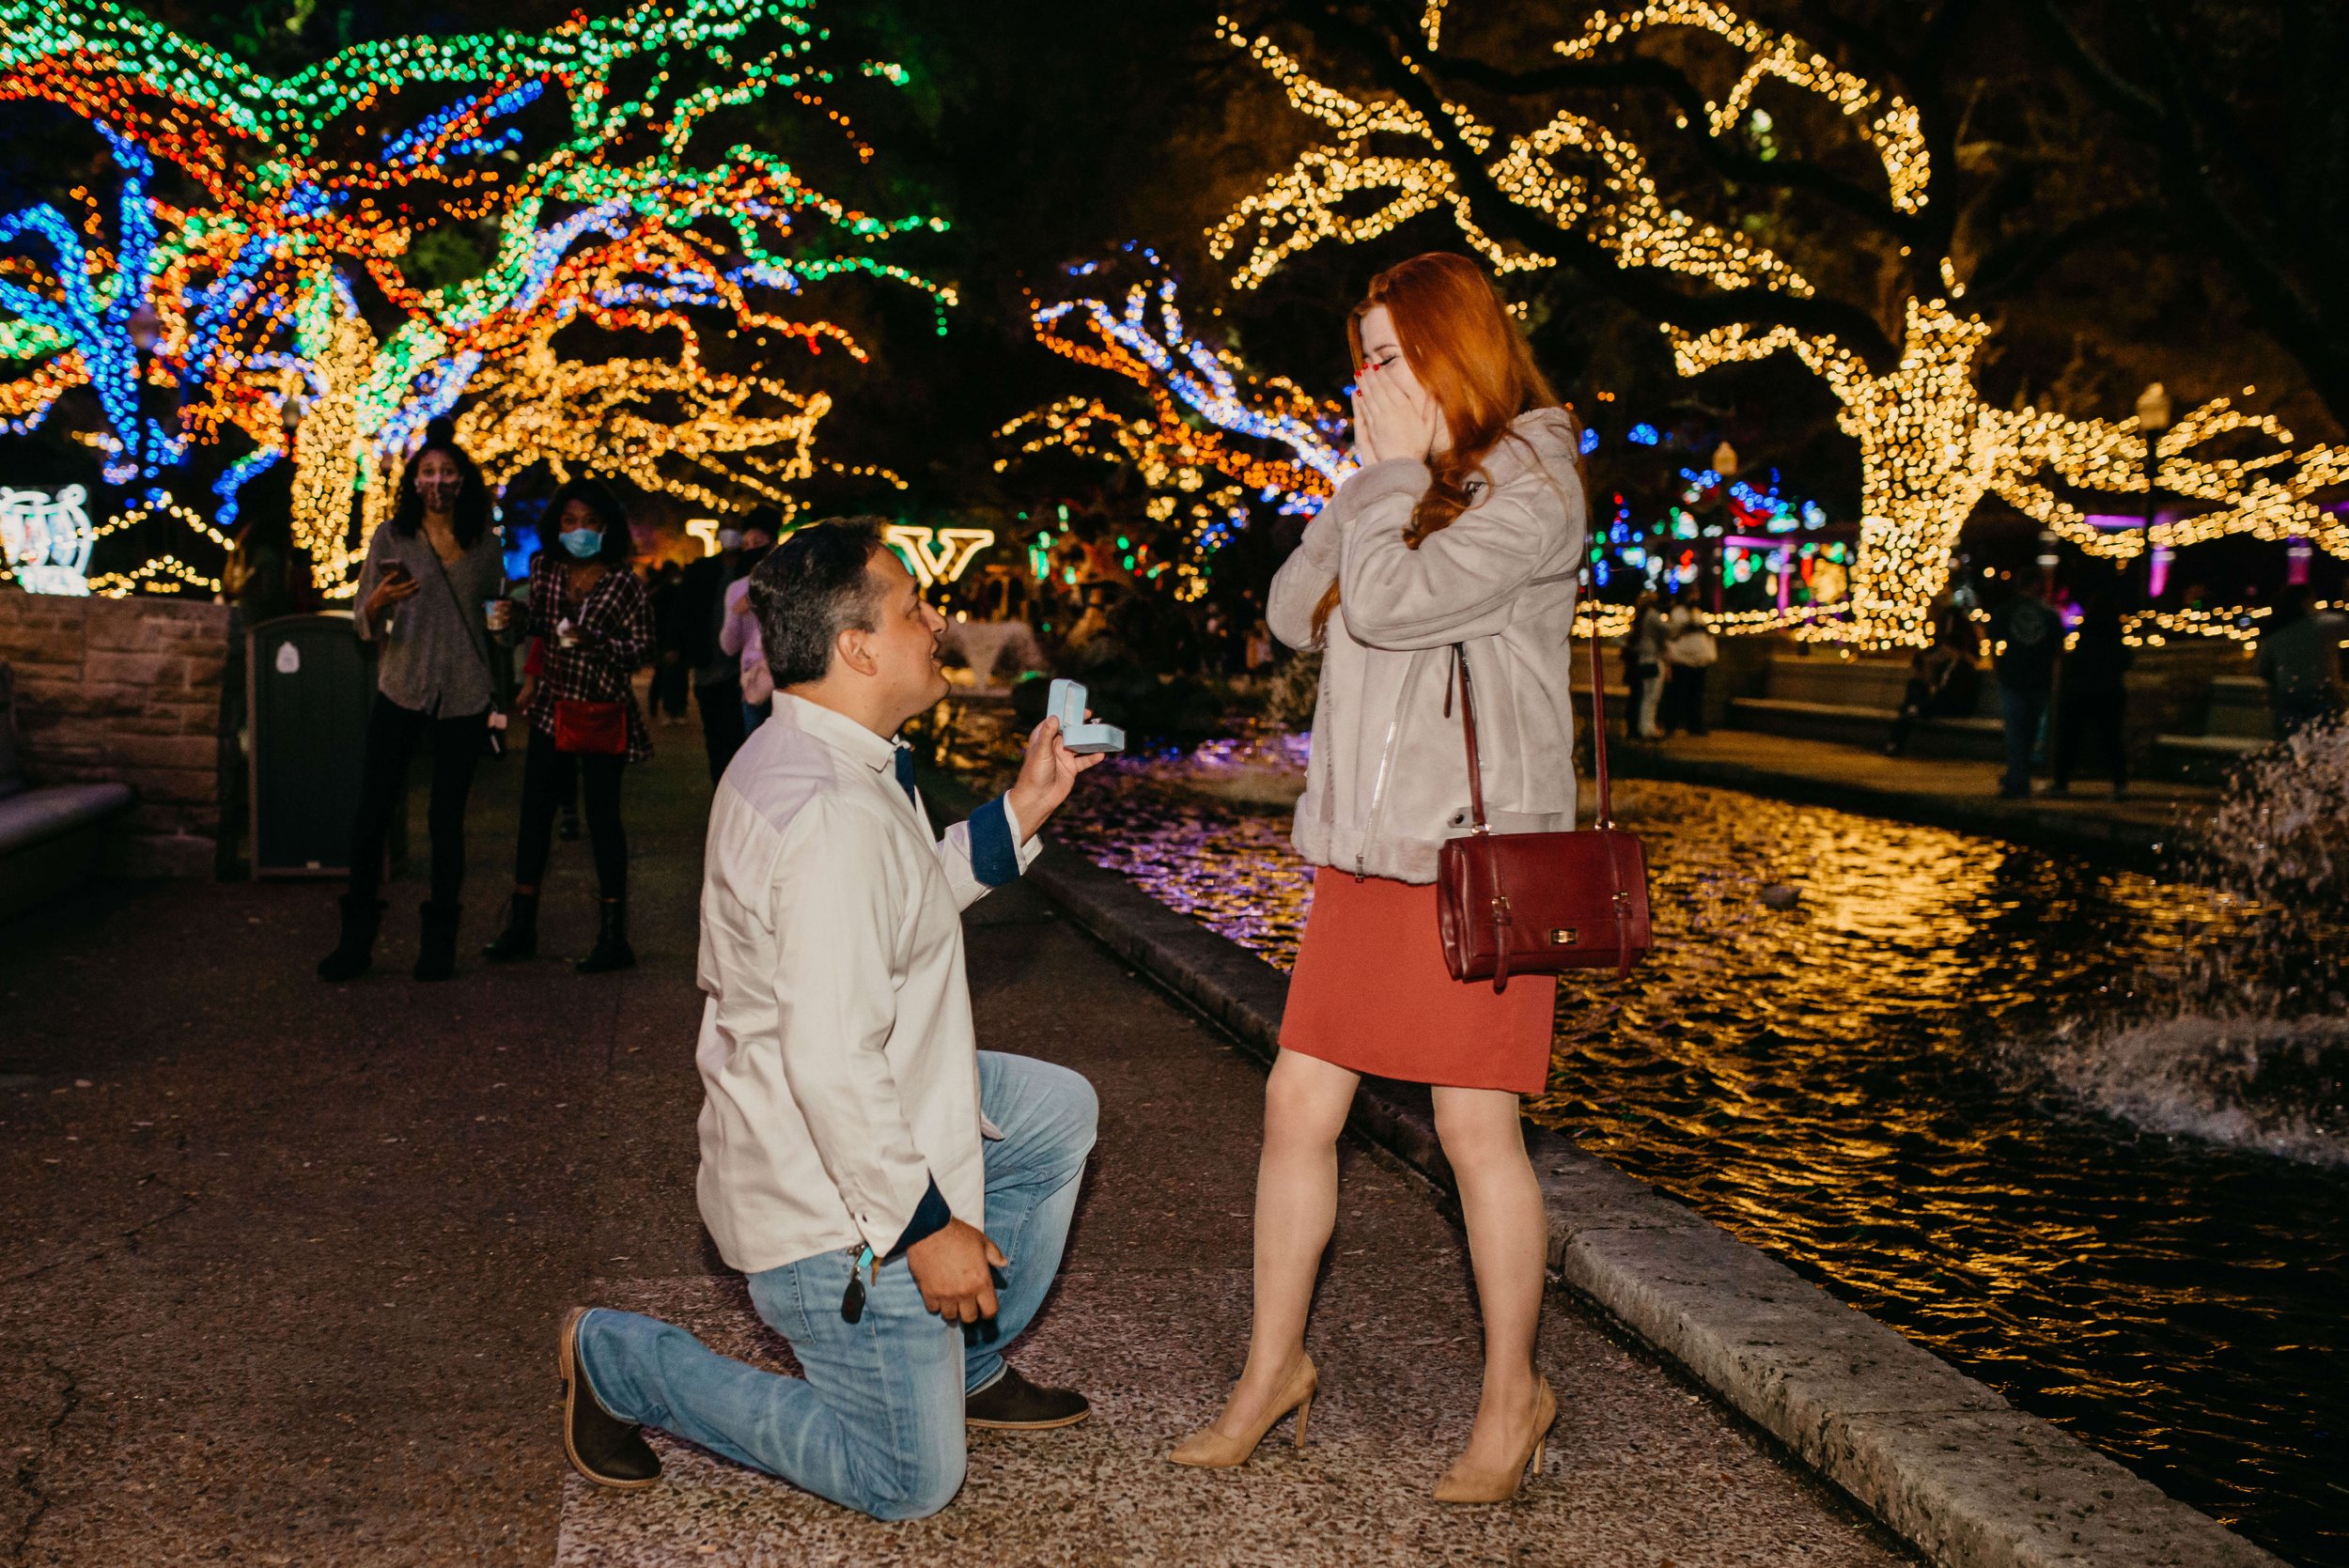 Surprise Proposal Photography in Houston, Texas photographed by J. Andrade Visual Arts